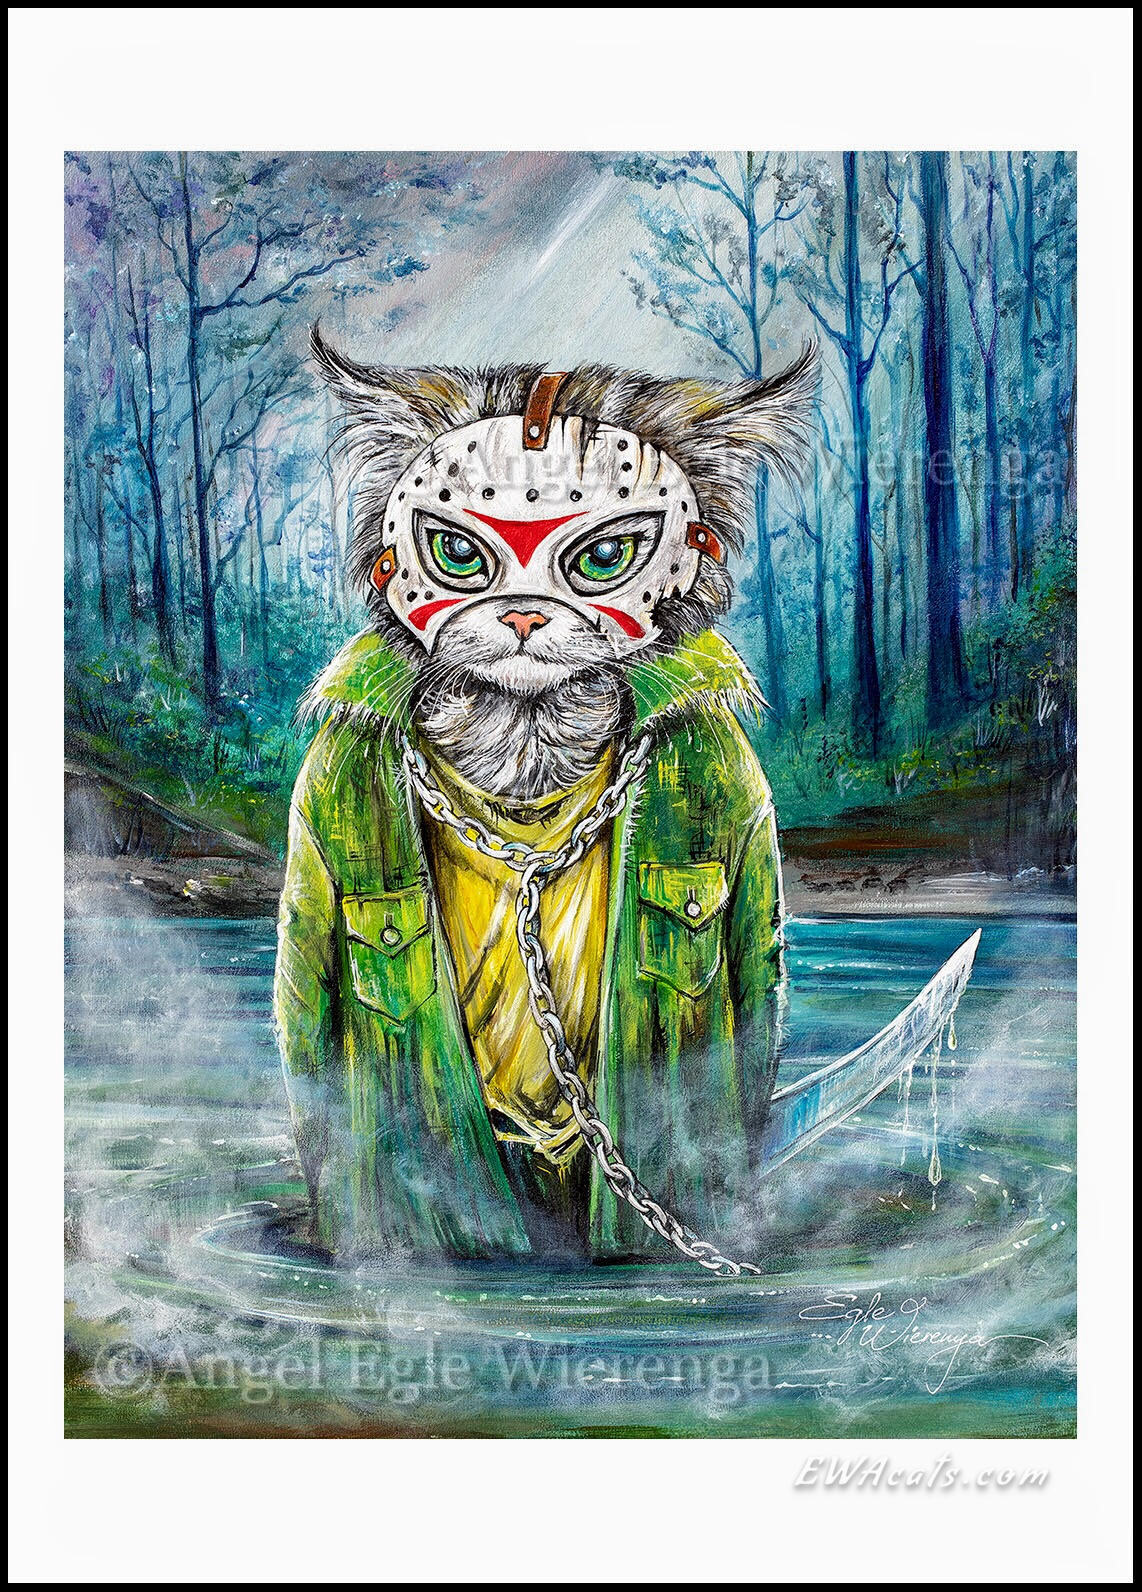 CANVAS "Jason MeowHiss" Open & Limited Edition